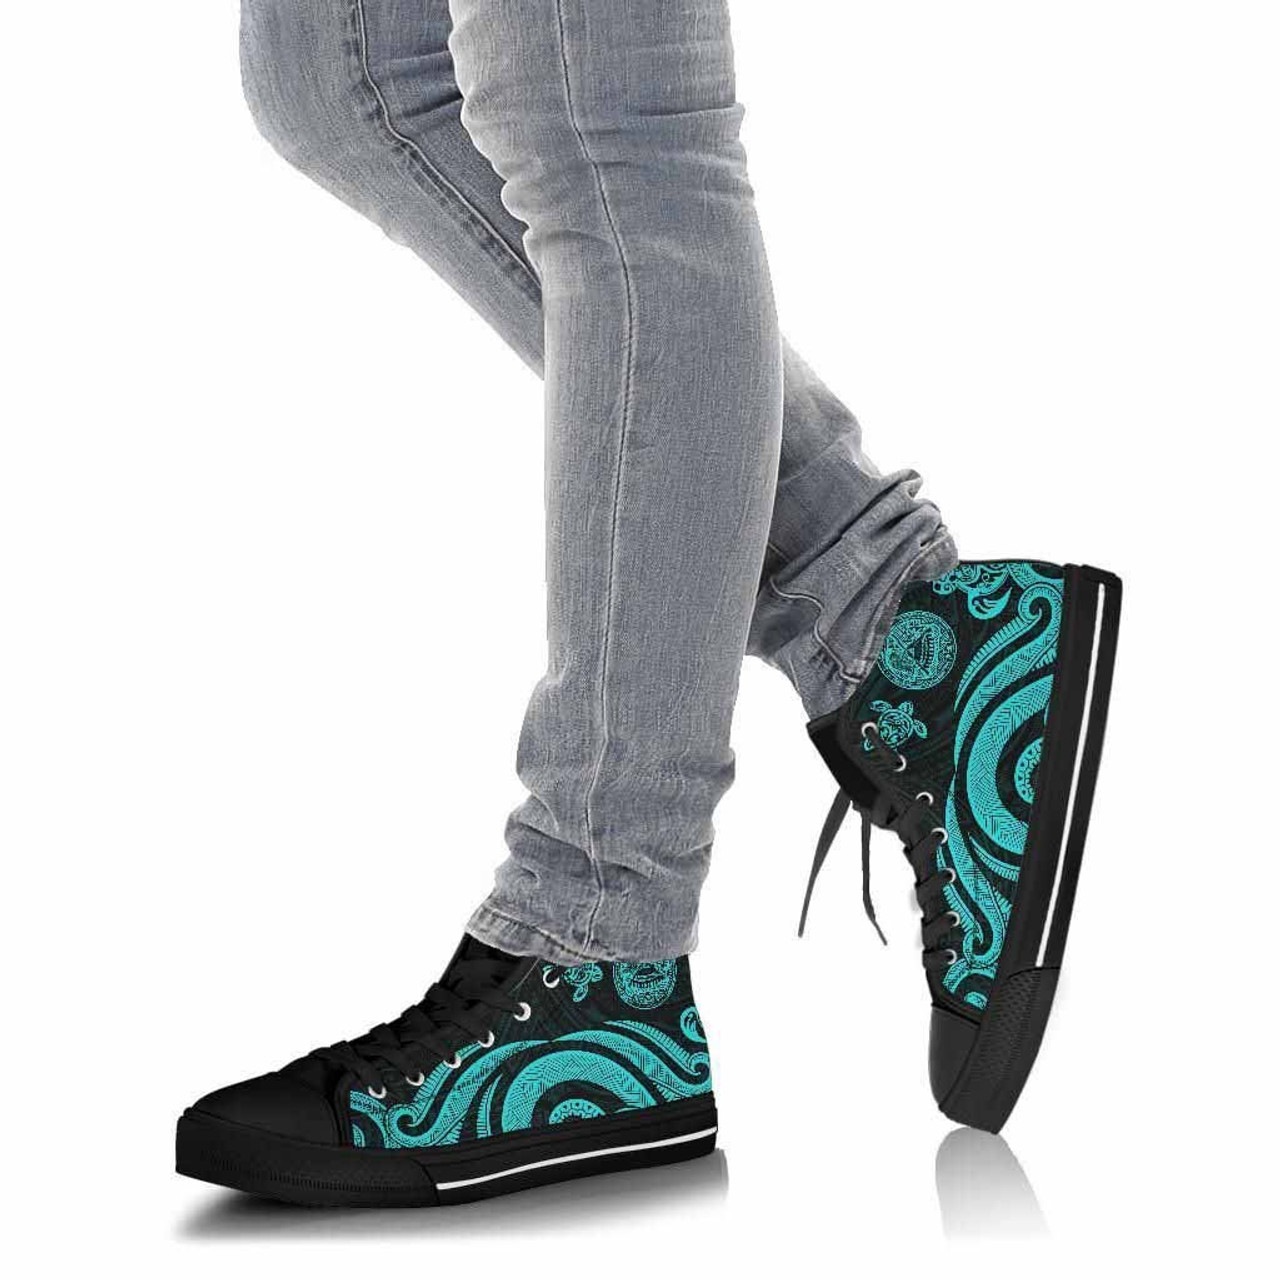 Cook Islands High Top Canvas Shoes - Turquoise Tentacle Turtle 4